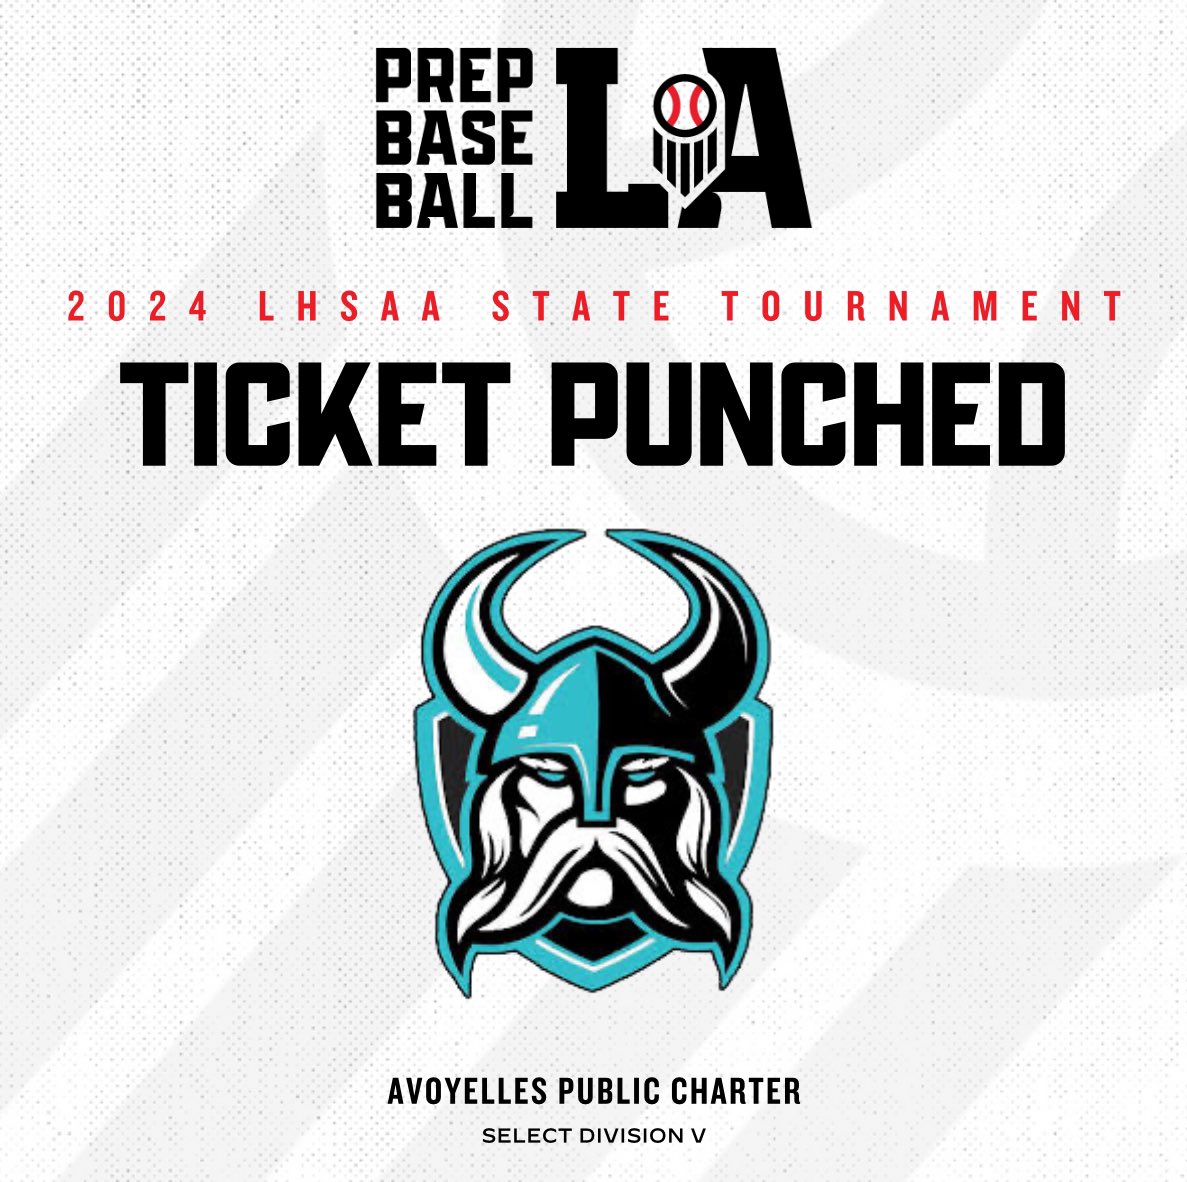 🎟️ 𝐓𝐢𝐜𝐤𝐞𝐭 𝐏𝐮𝐧𝐜𝐡𝐞𝐝 We’ll see the Select Division V #1 seed Avoyelles Public Charter in Sulphur, LA next week for the 2024 @LHSAAsports State Tournament! #BeSeen @prepbaseball | @AlexArmandPBR